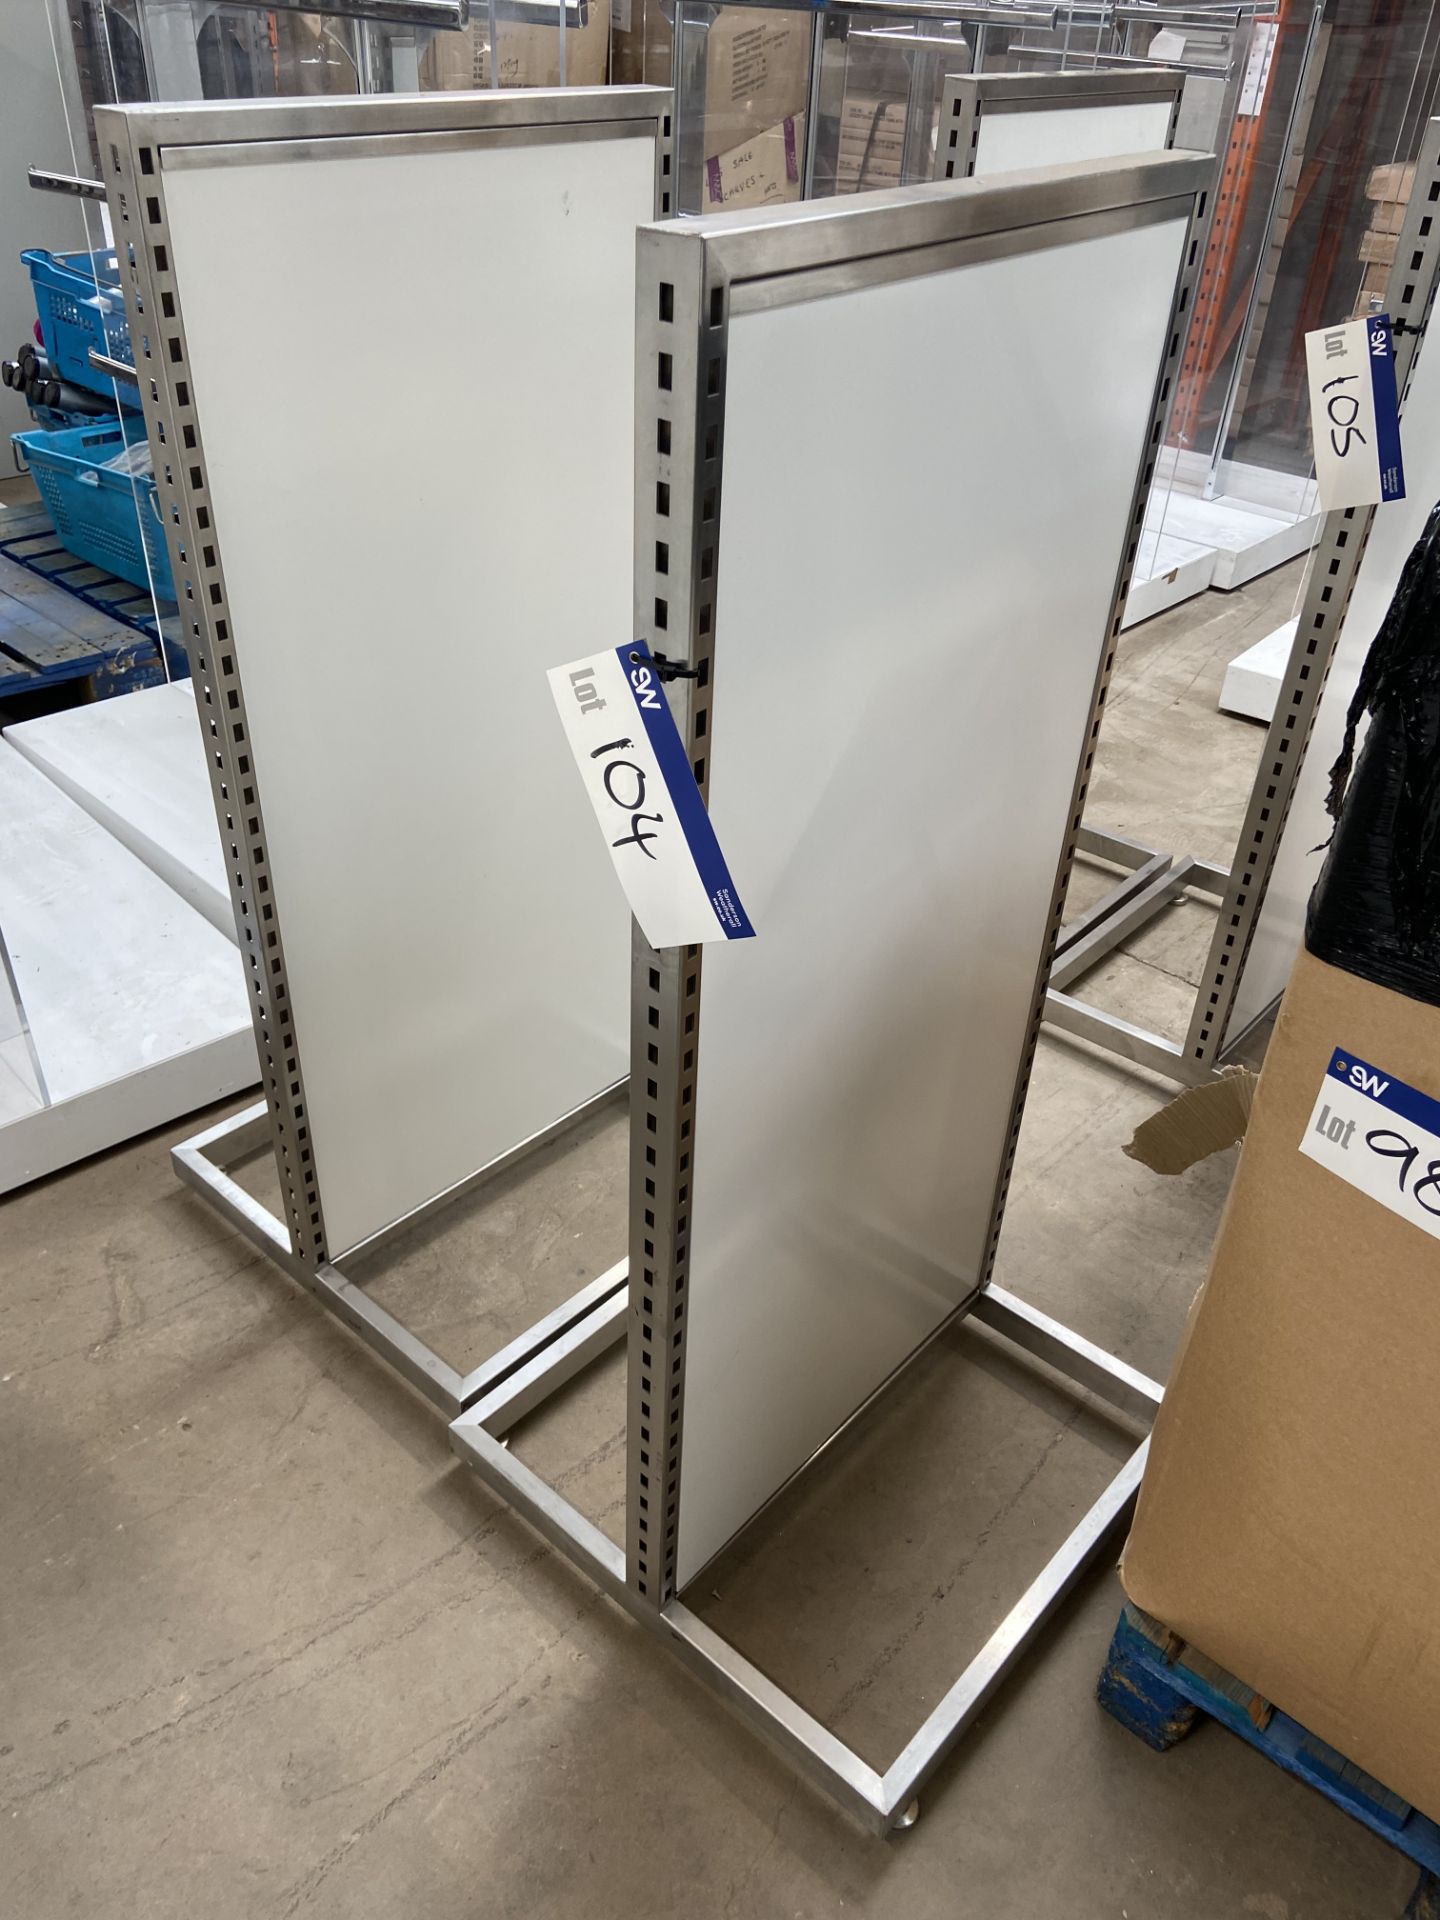 Two Stainless Steel Framed Double Sided Stands, each 620mm wide, Lot located 33-37 Carron Place,